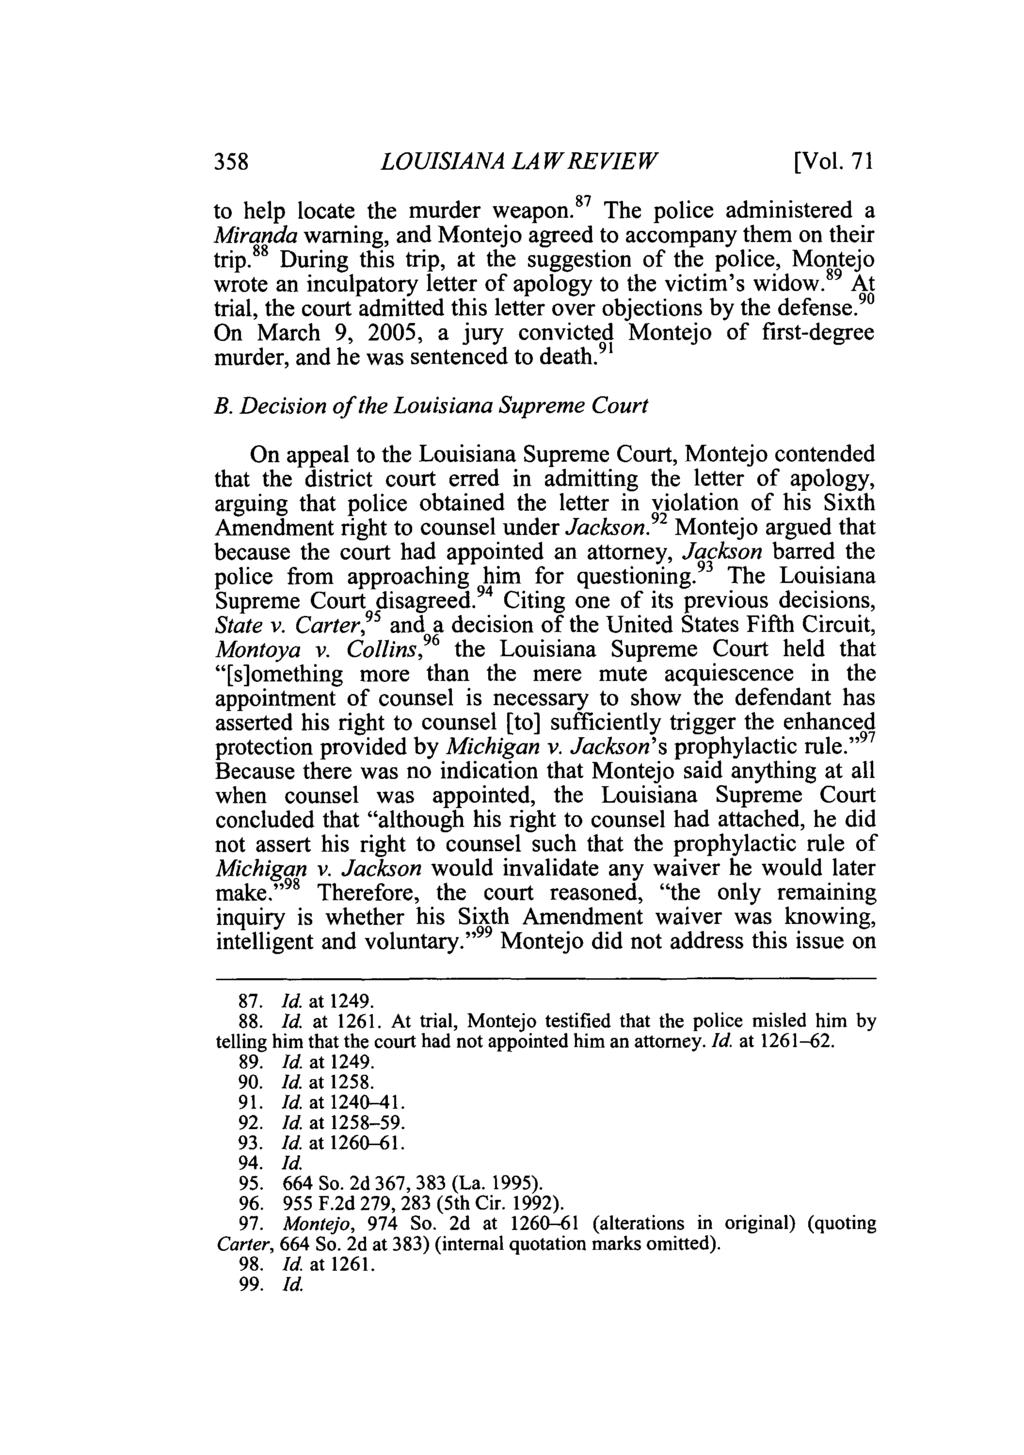 358 LOUISIANA LAW REVIEW [Vol. 71 to help locate the murder weapon. 8 7 The police administered a Miranda warning, and Montejo agreed to accompany them on their 88 ti, sgeto h trip.